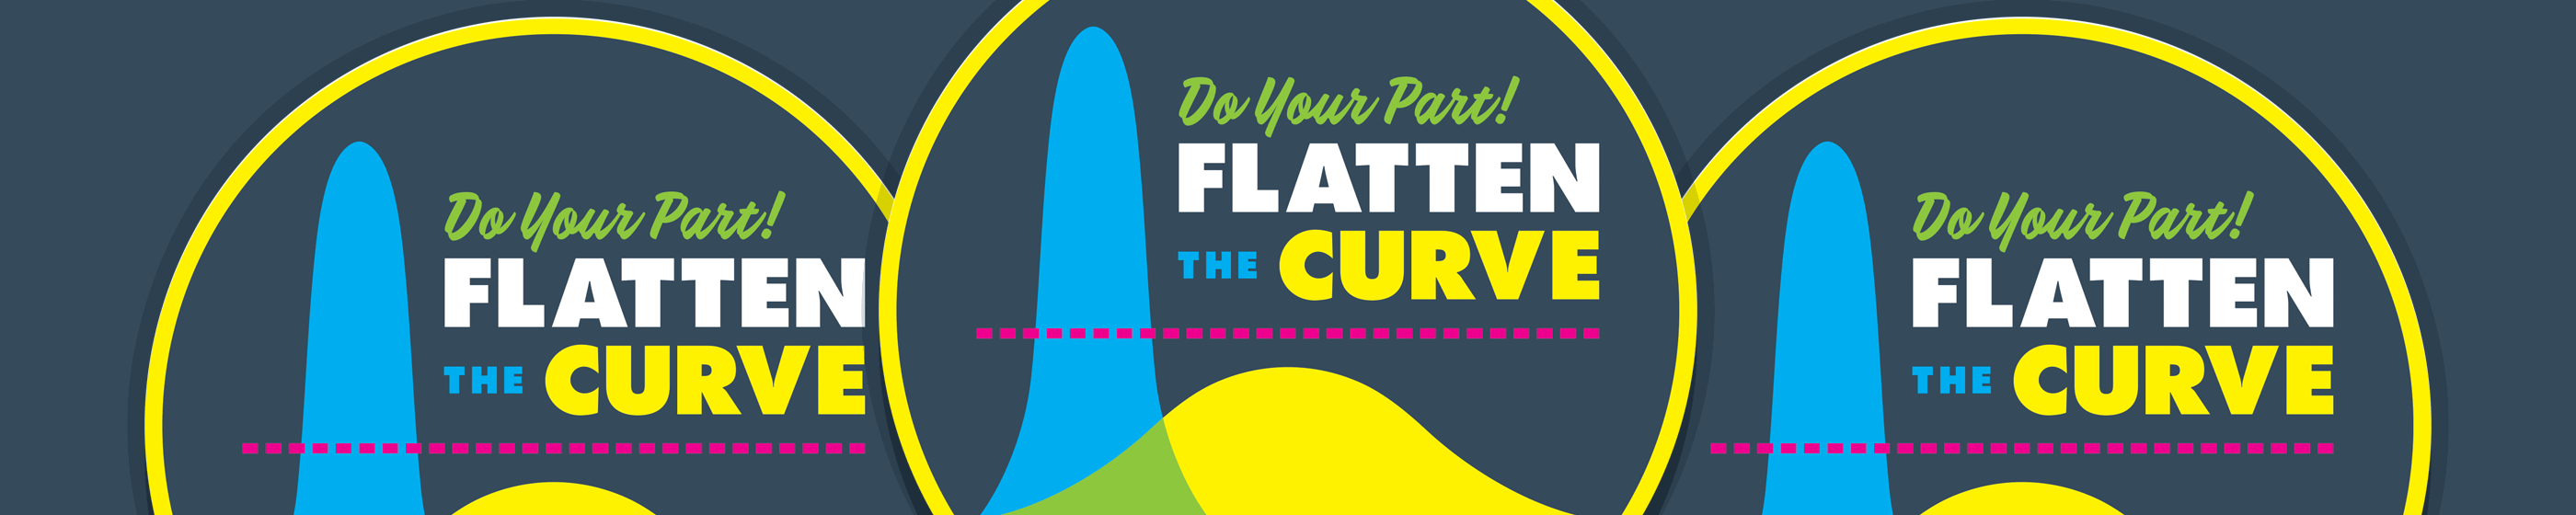 Flatten The Curve Button Cover Image